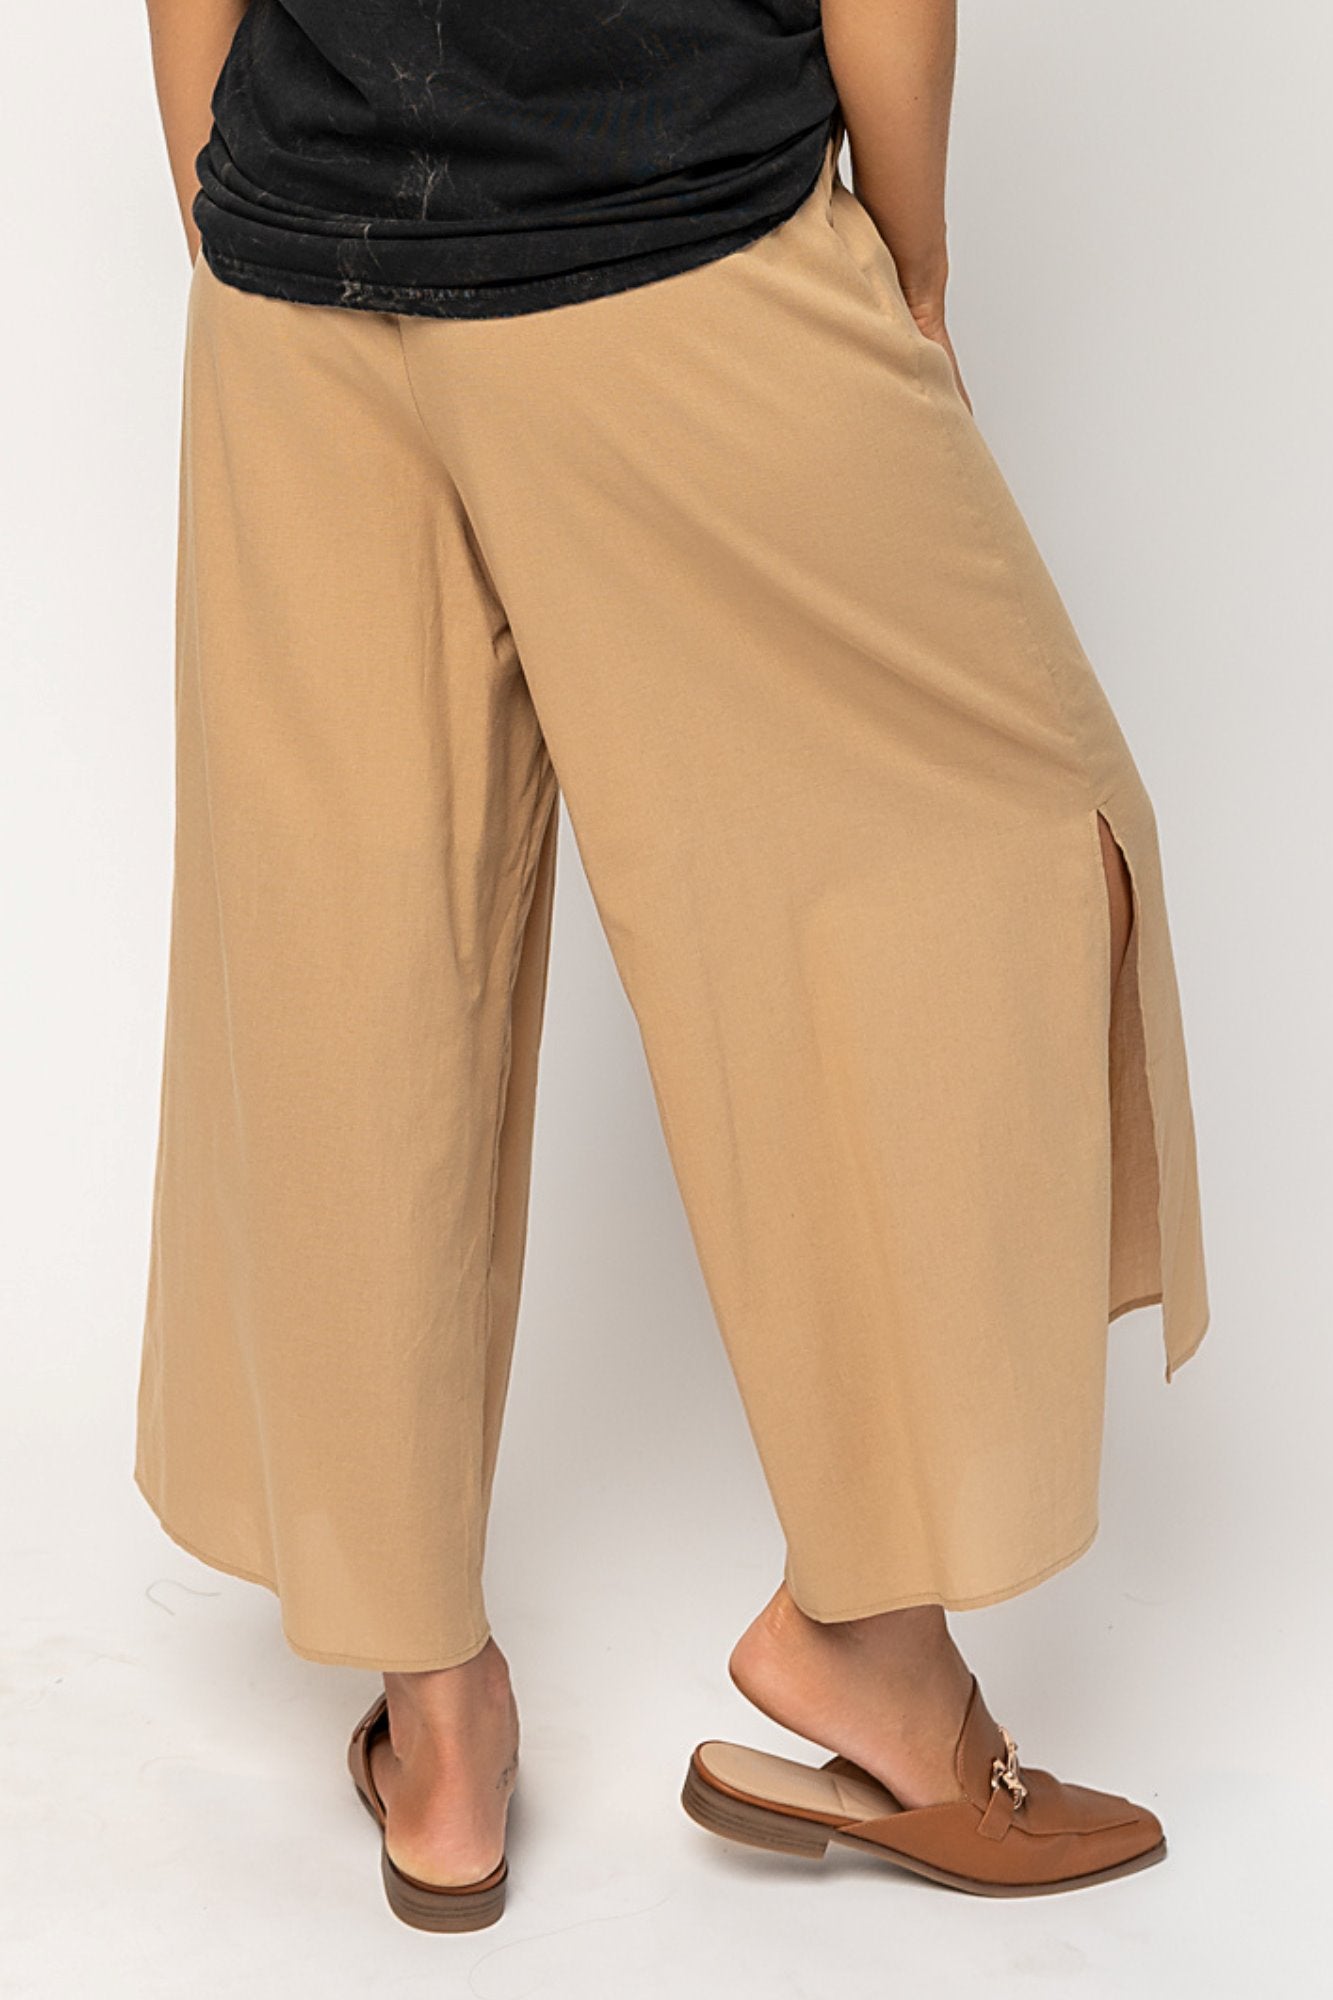 Leo Pants in Camel Holley Girl 